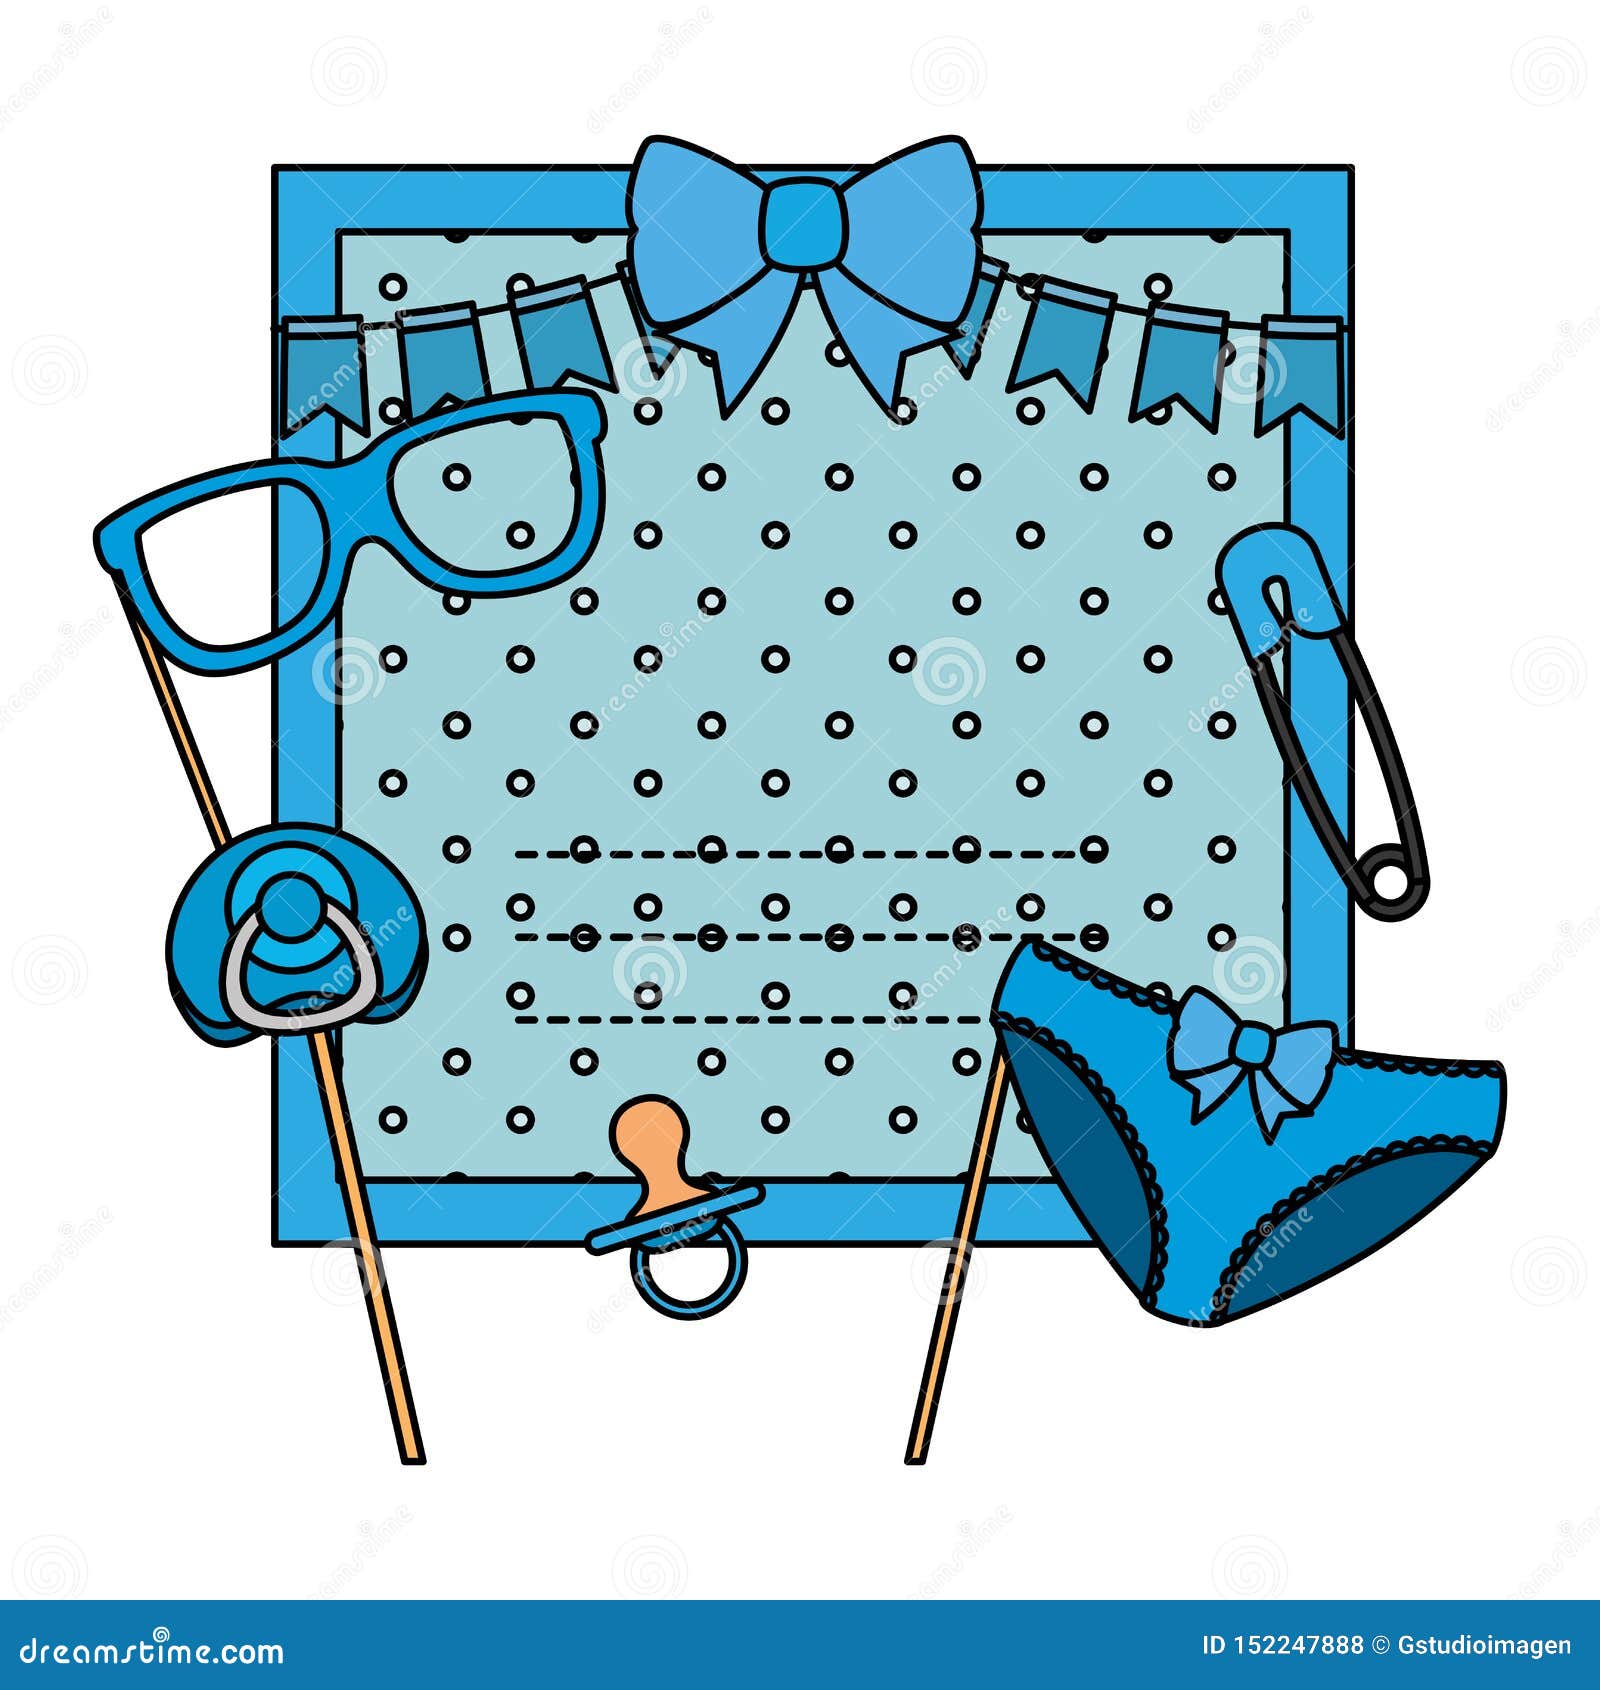 Baby Shower Card with Clothes and Footprint Stock Illustration ...